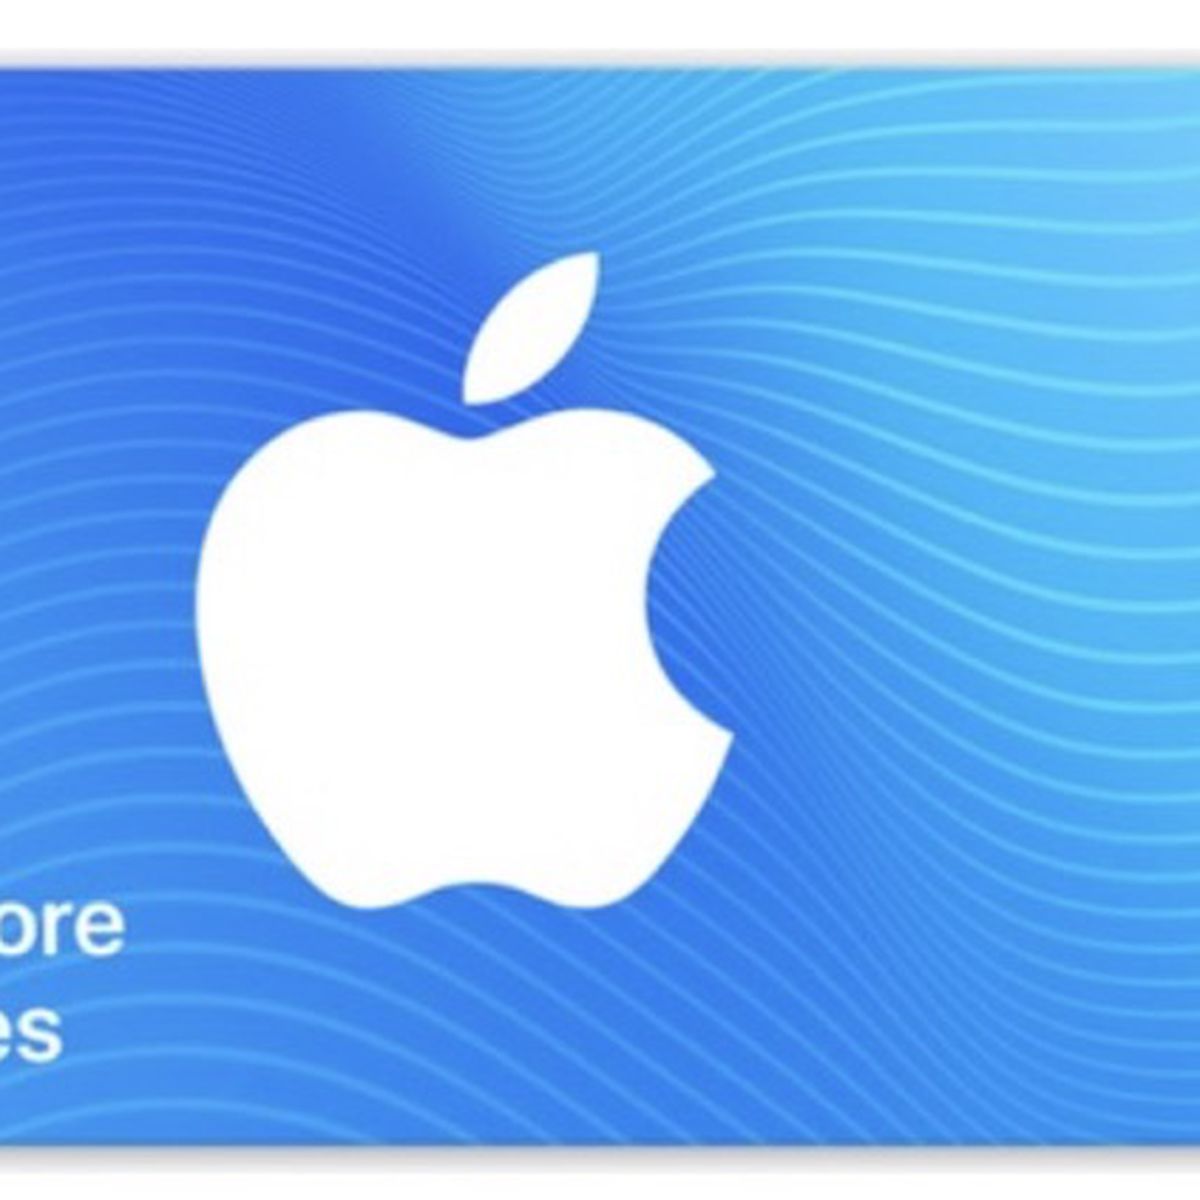 itunes gift card via paypal